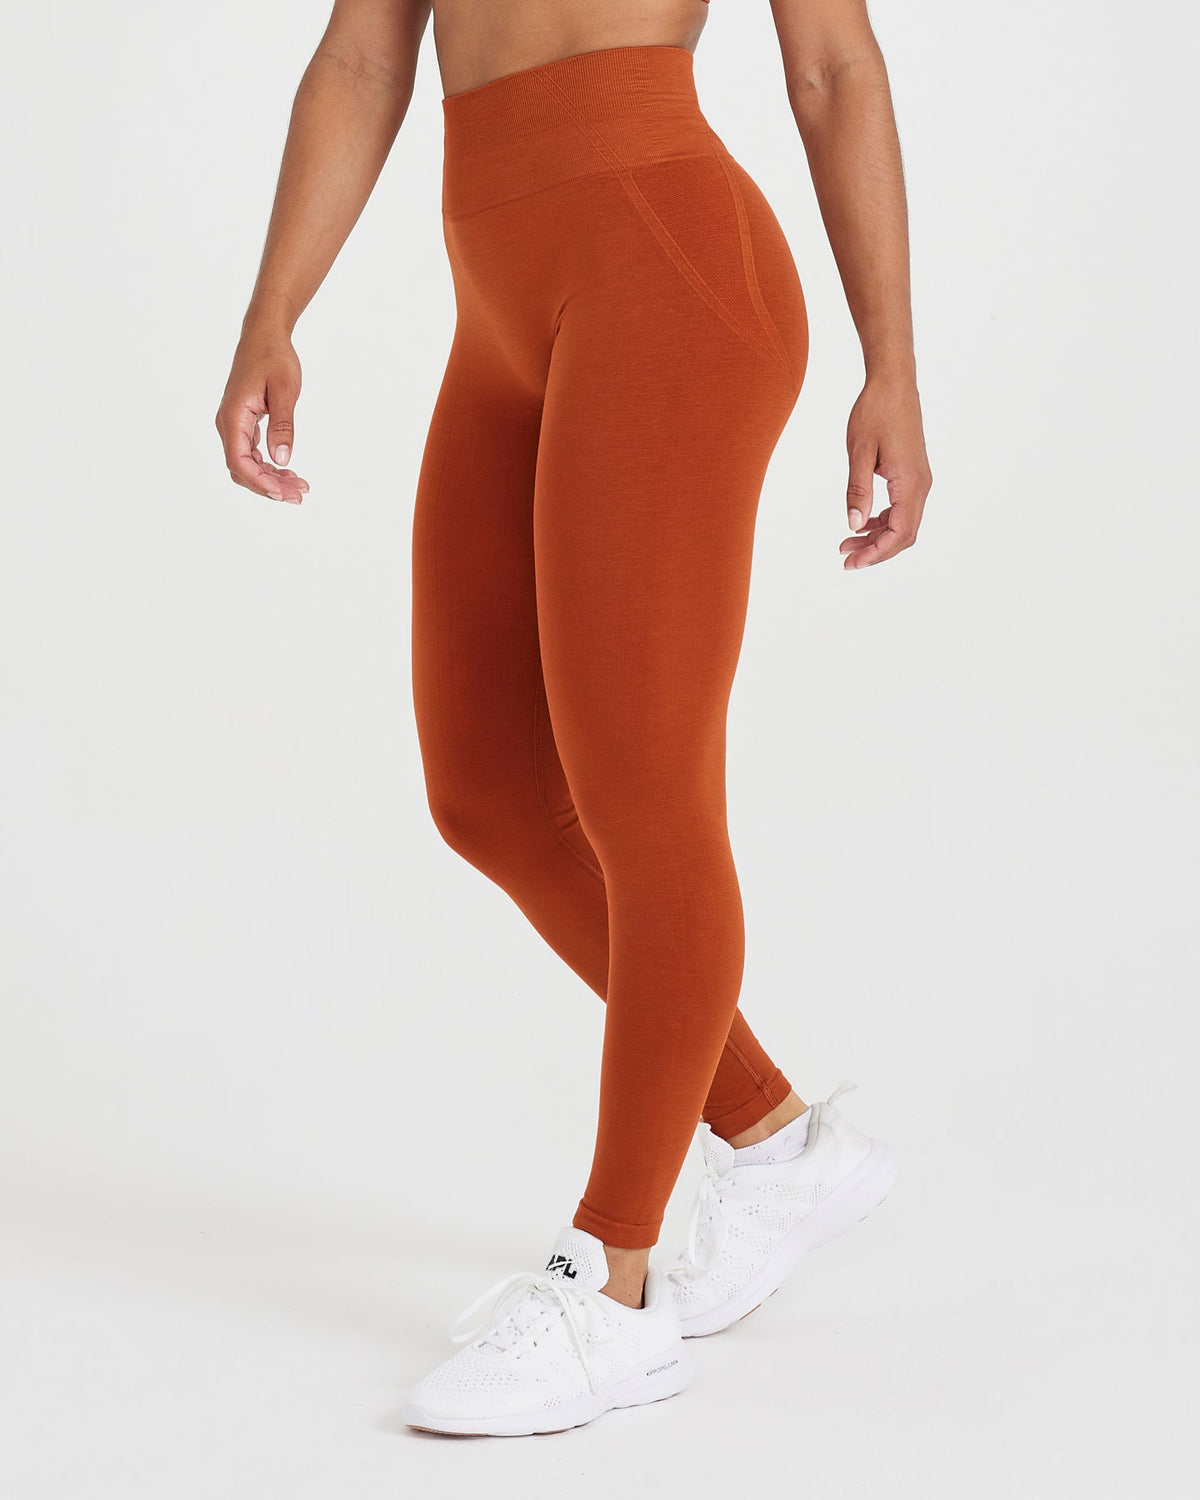 wHiPi.'s Signature Copper Brown Seamless High Waisted Leggings